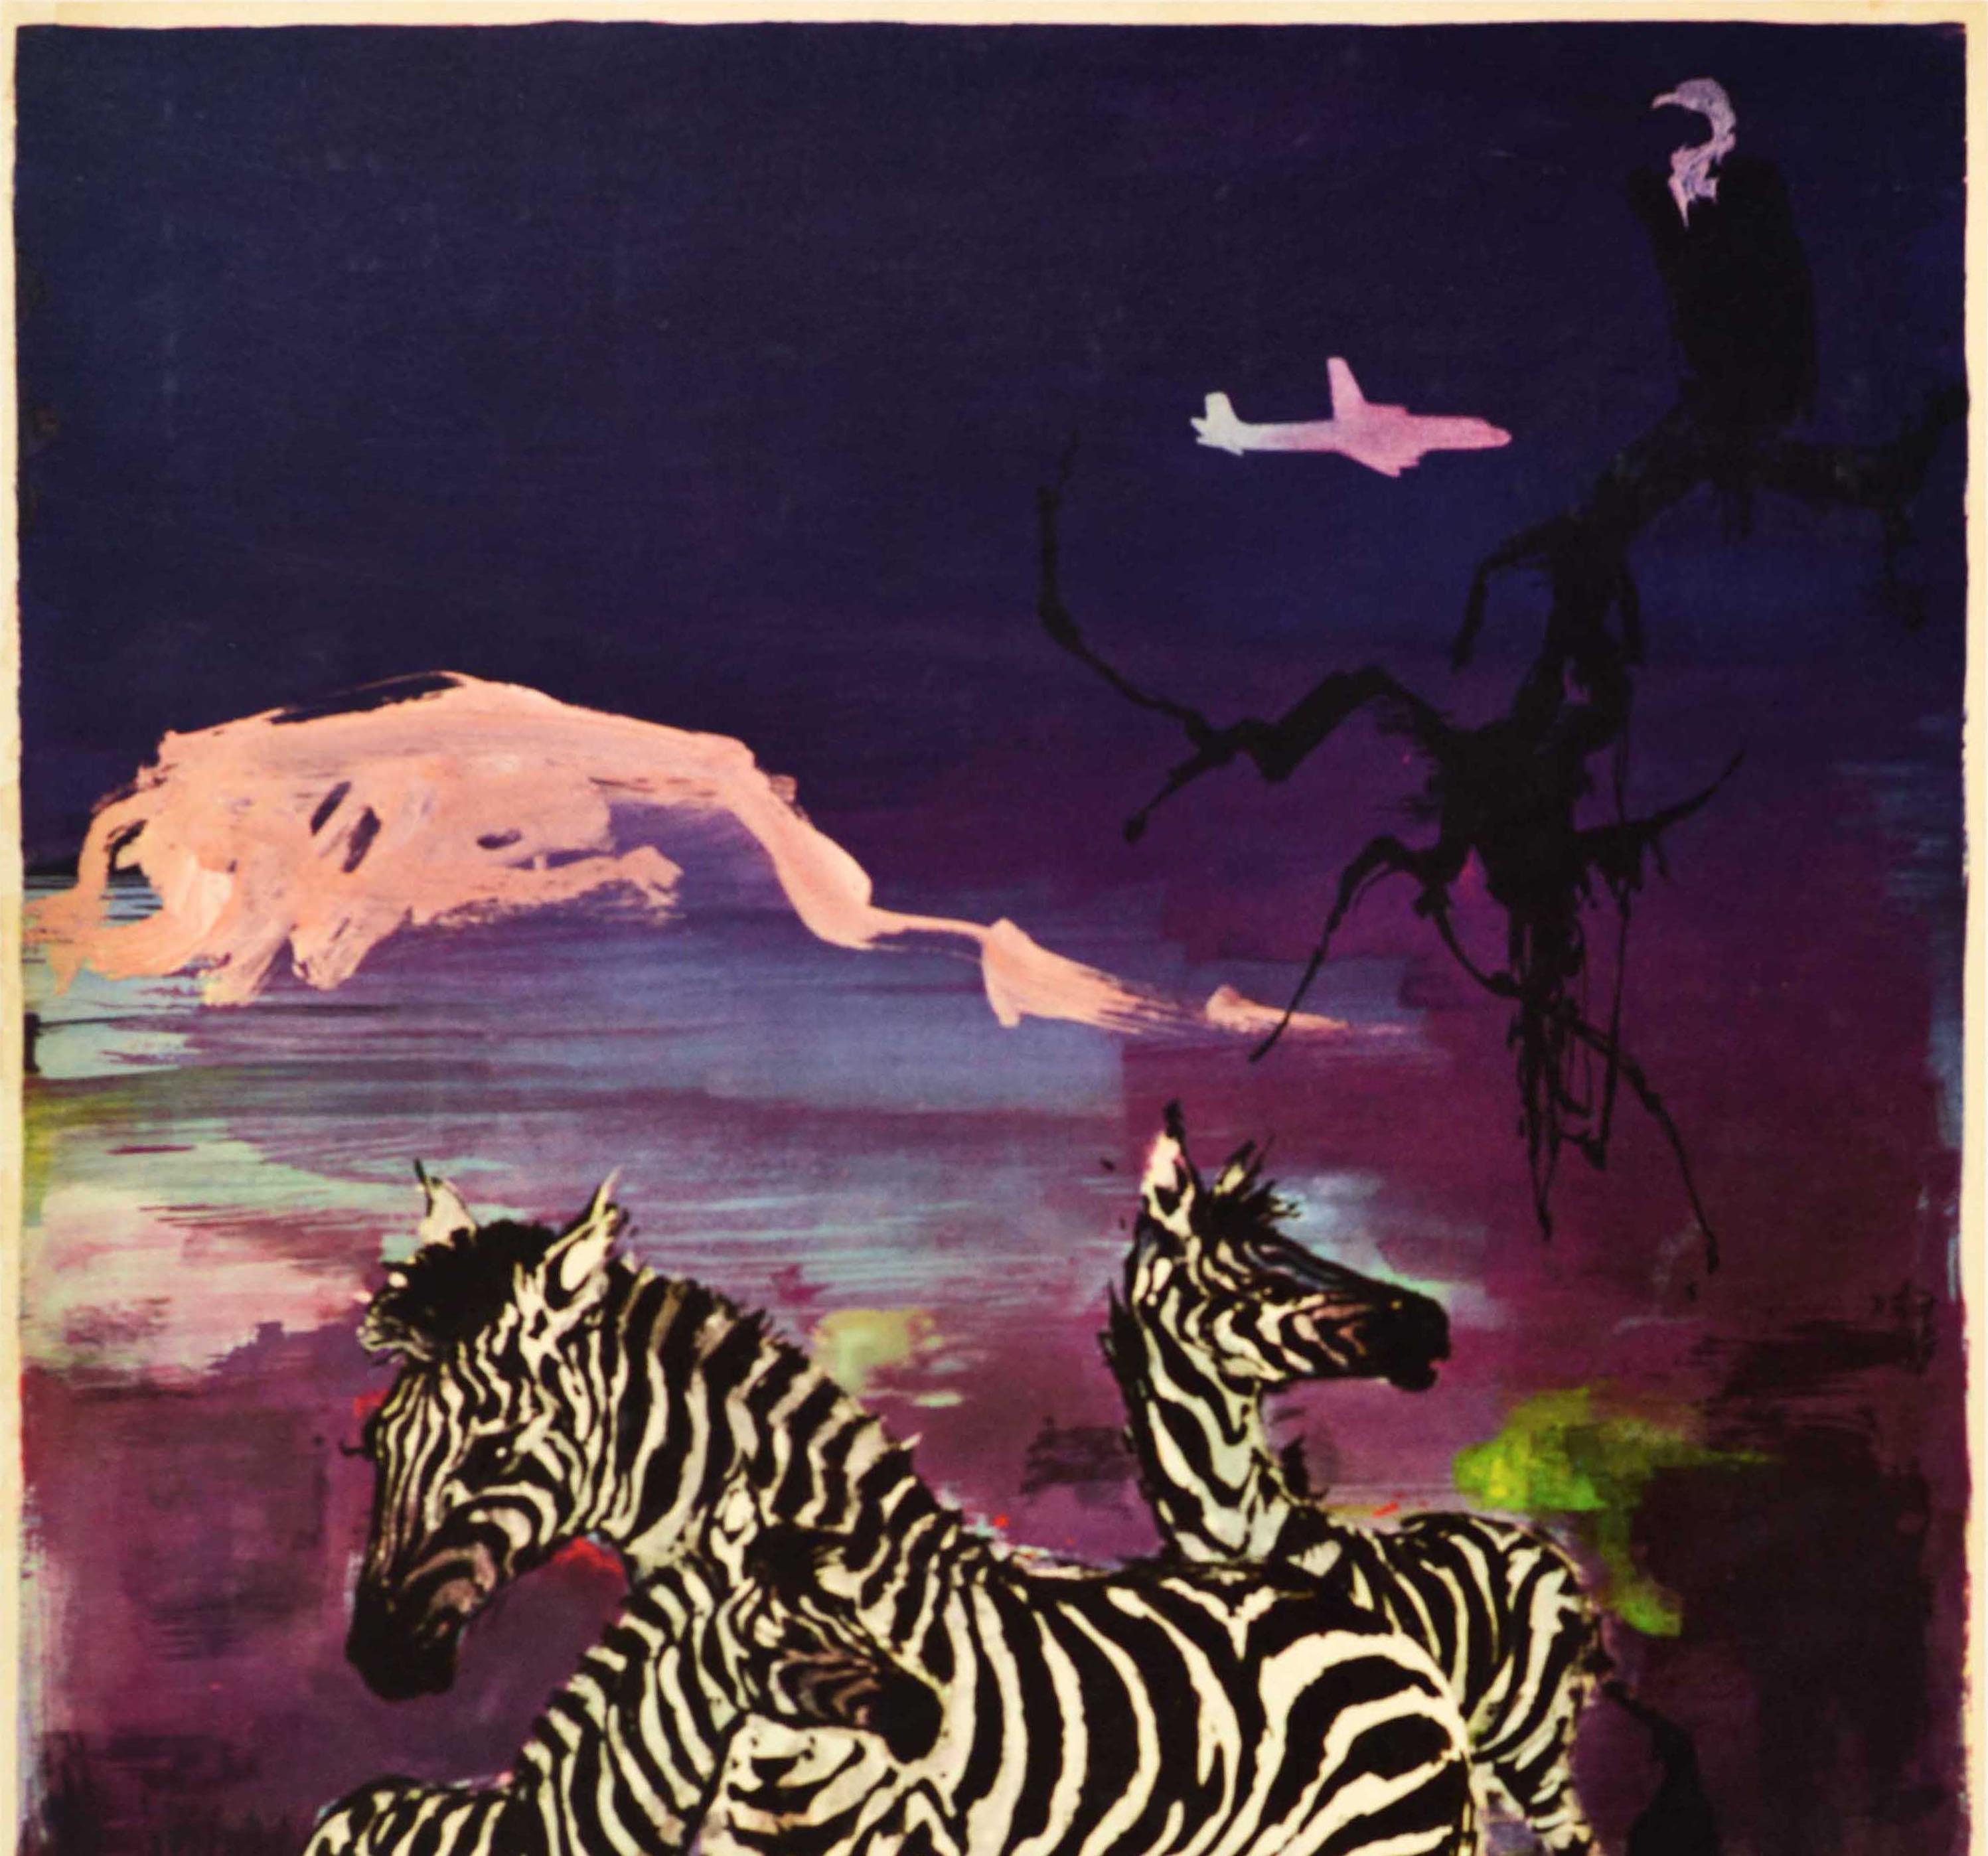 Original vintage travel poster for Africa issued by SAS Scandinavian Airlines System featuring a colourful design by Otto Nielsen (1916-2000) of zebras against a purple night sky with a vulture sitting on a tree branch and a plane flying over a